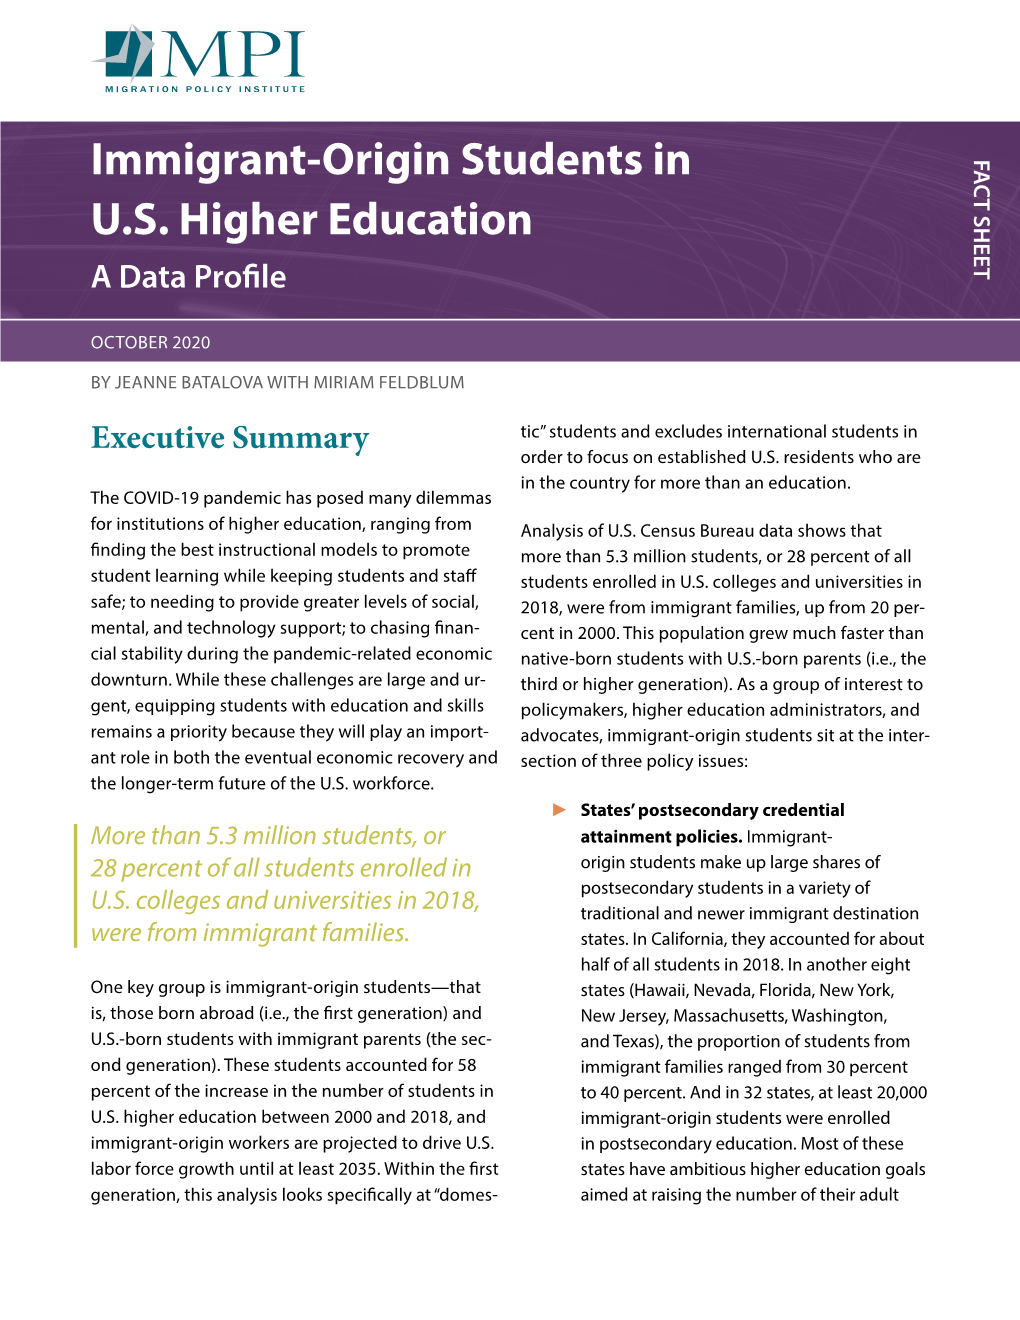 Immigrant-Origin Students in US Higher Education